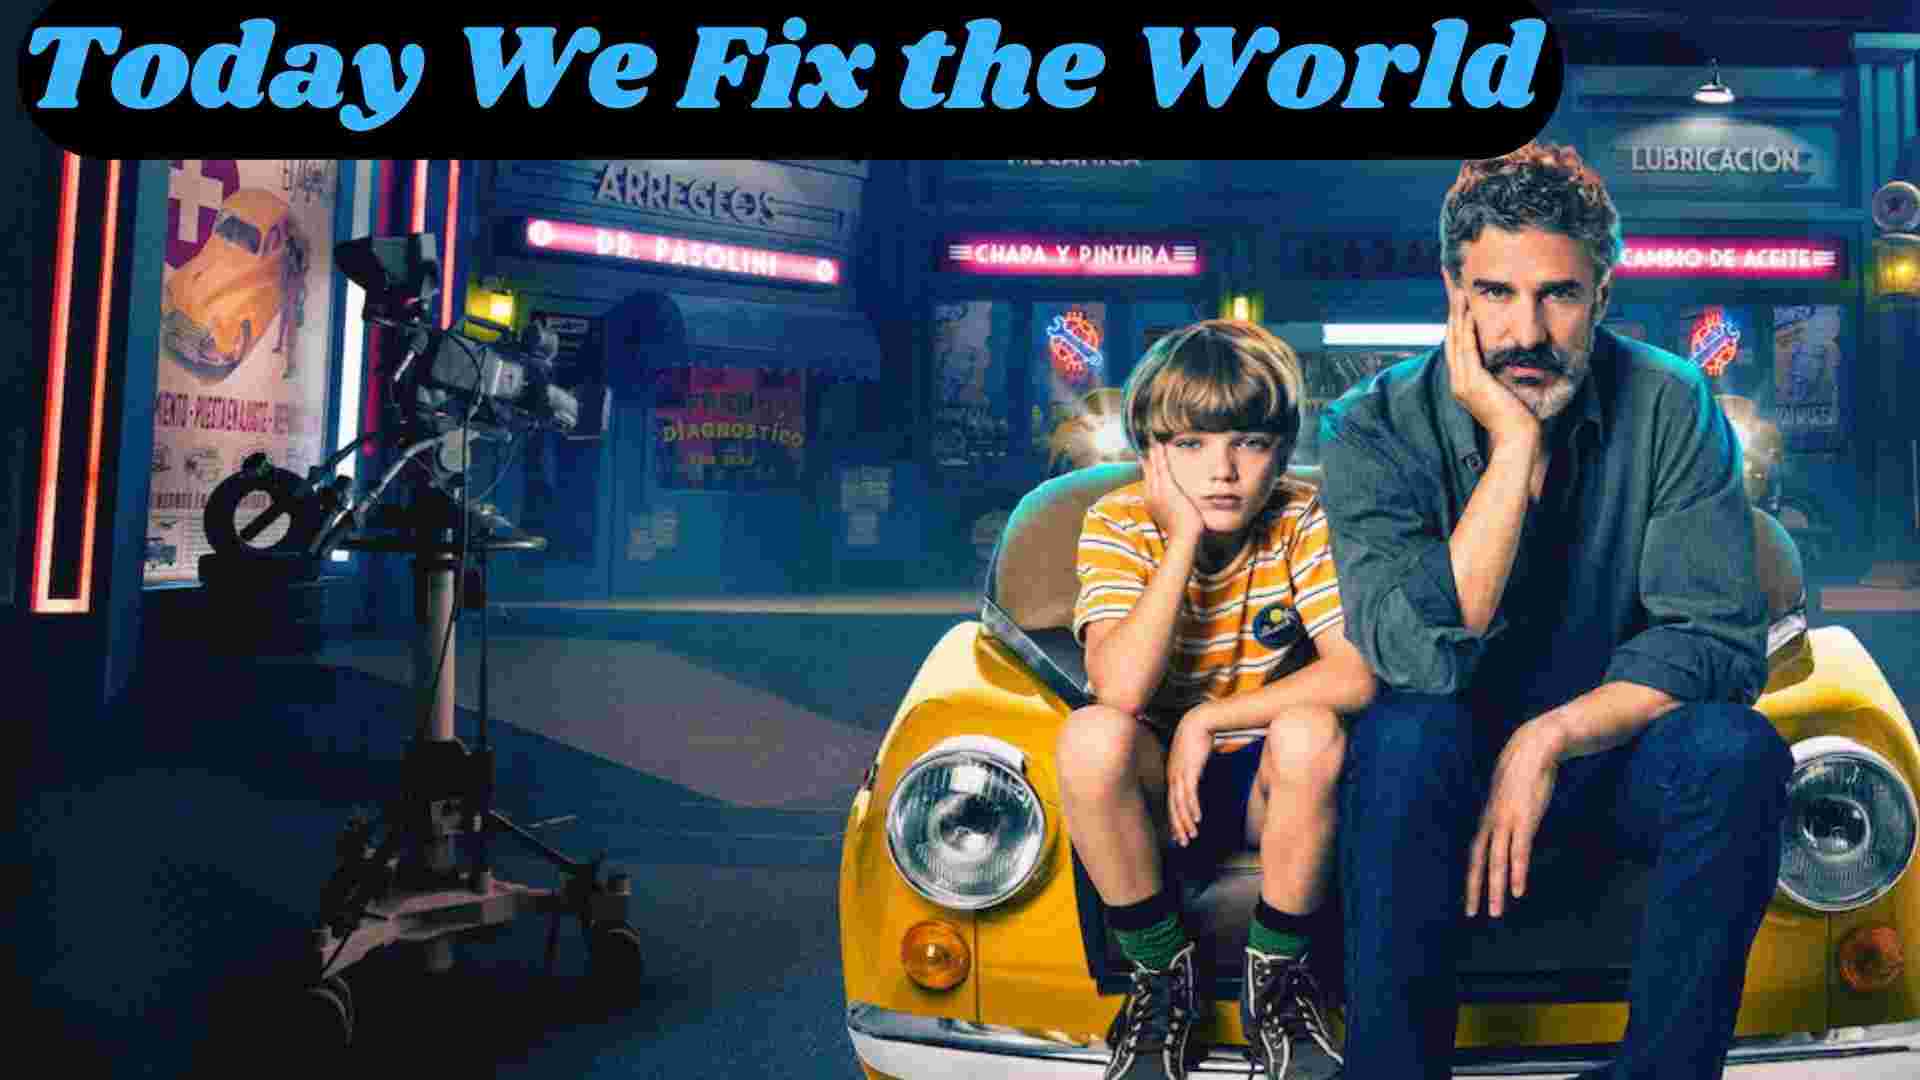 Today We Fix the World Parents Guide and Age Rating | 2022